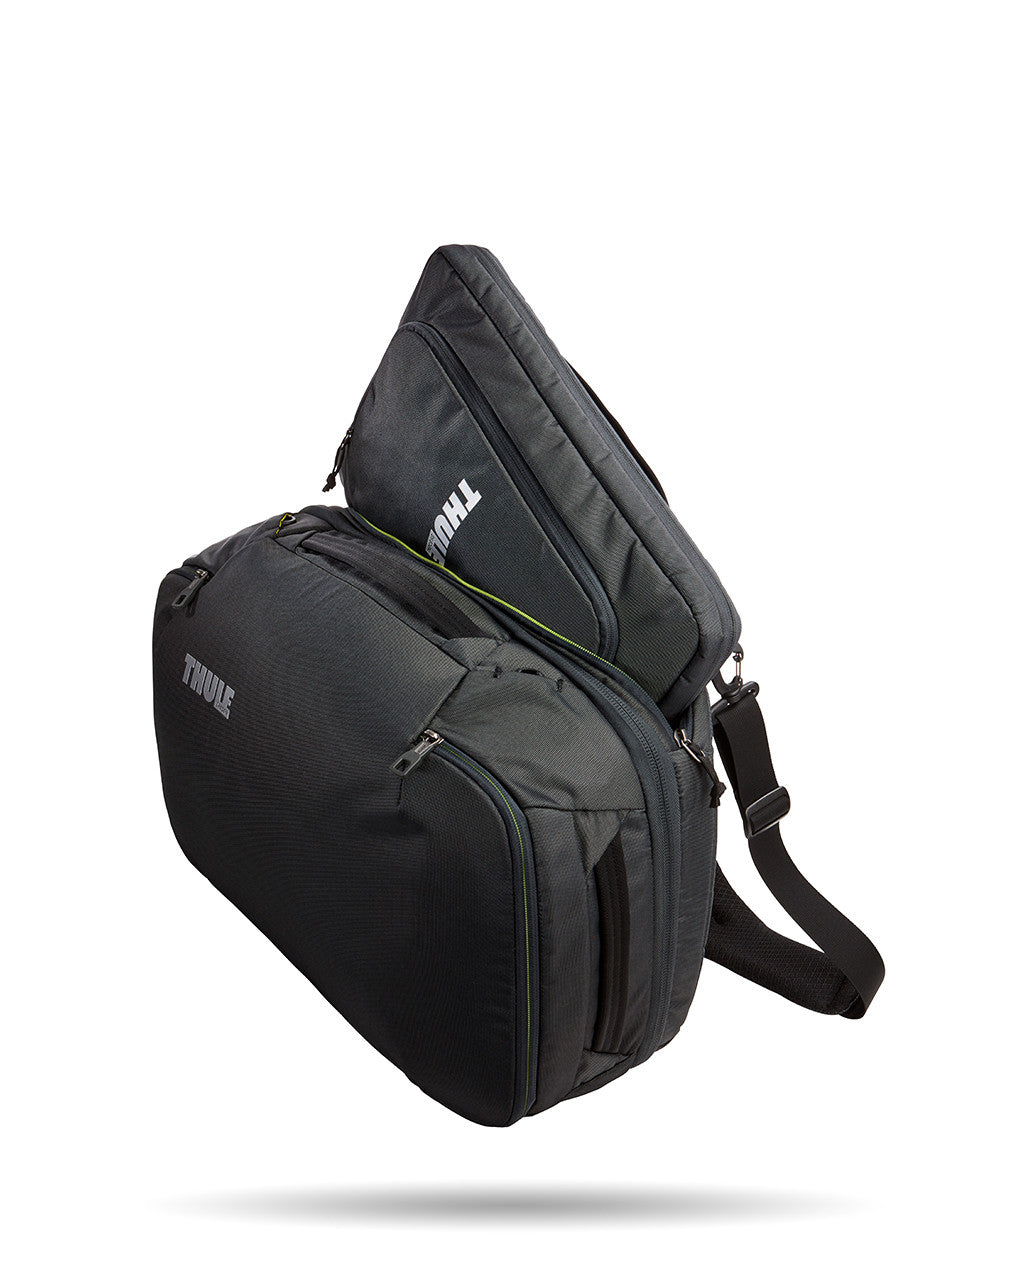 Thule Subterra Carry On Backpack - 40L